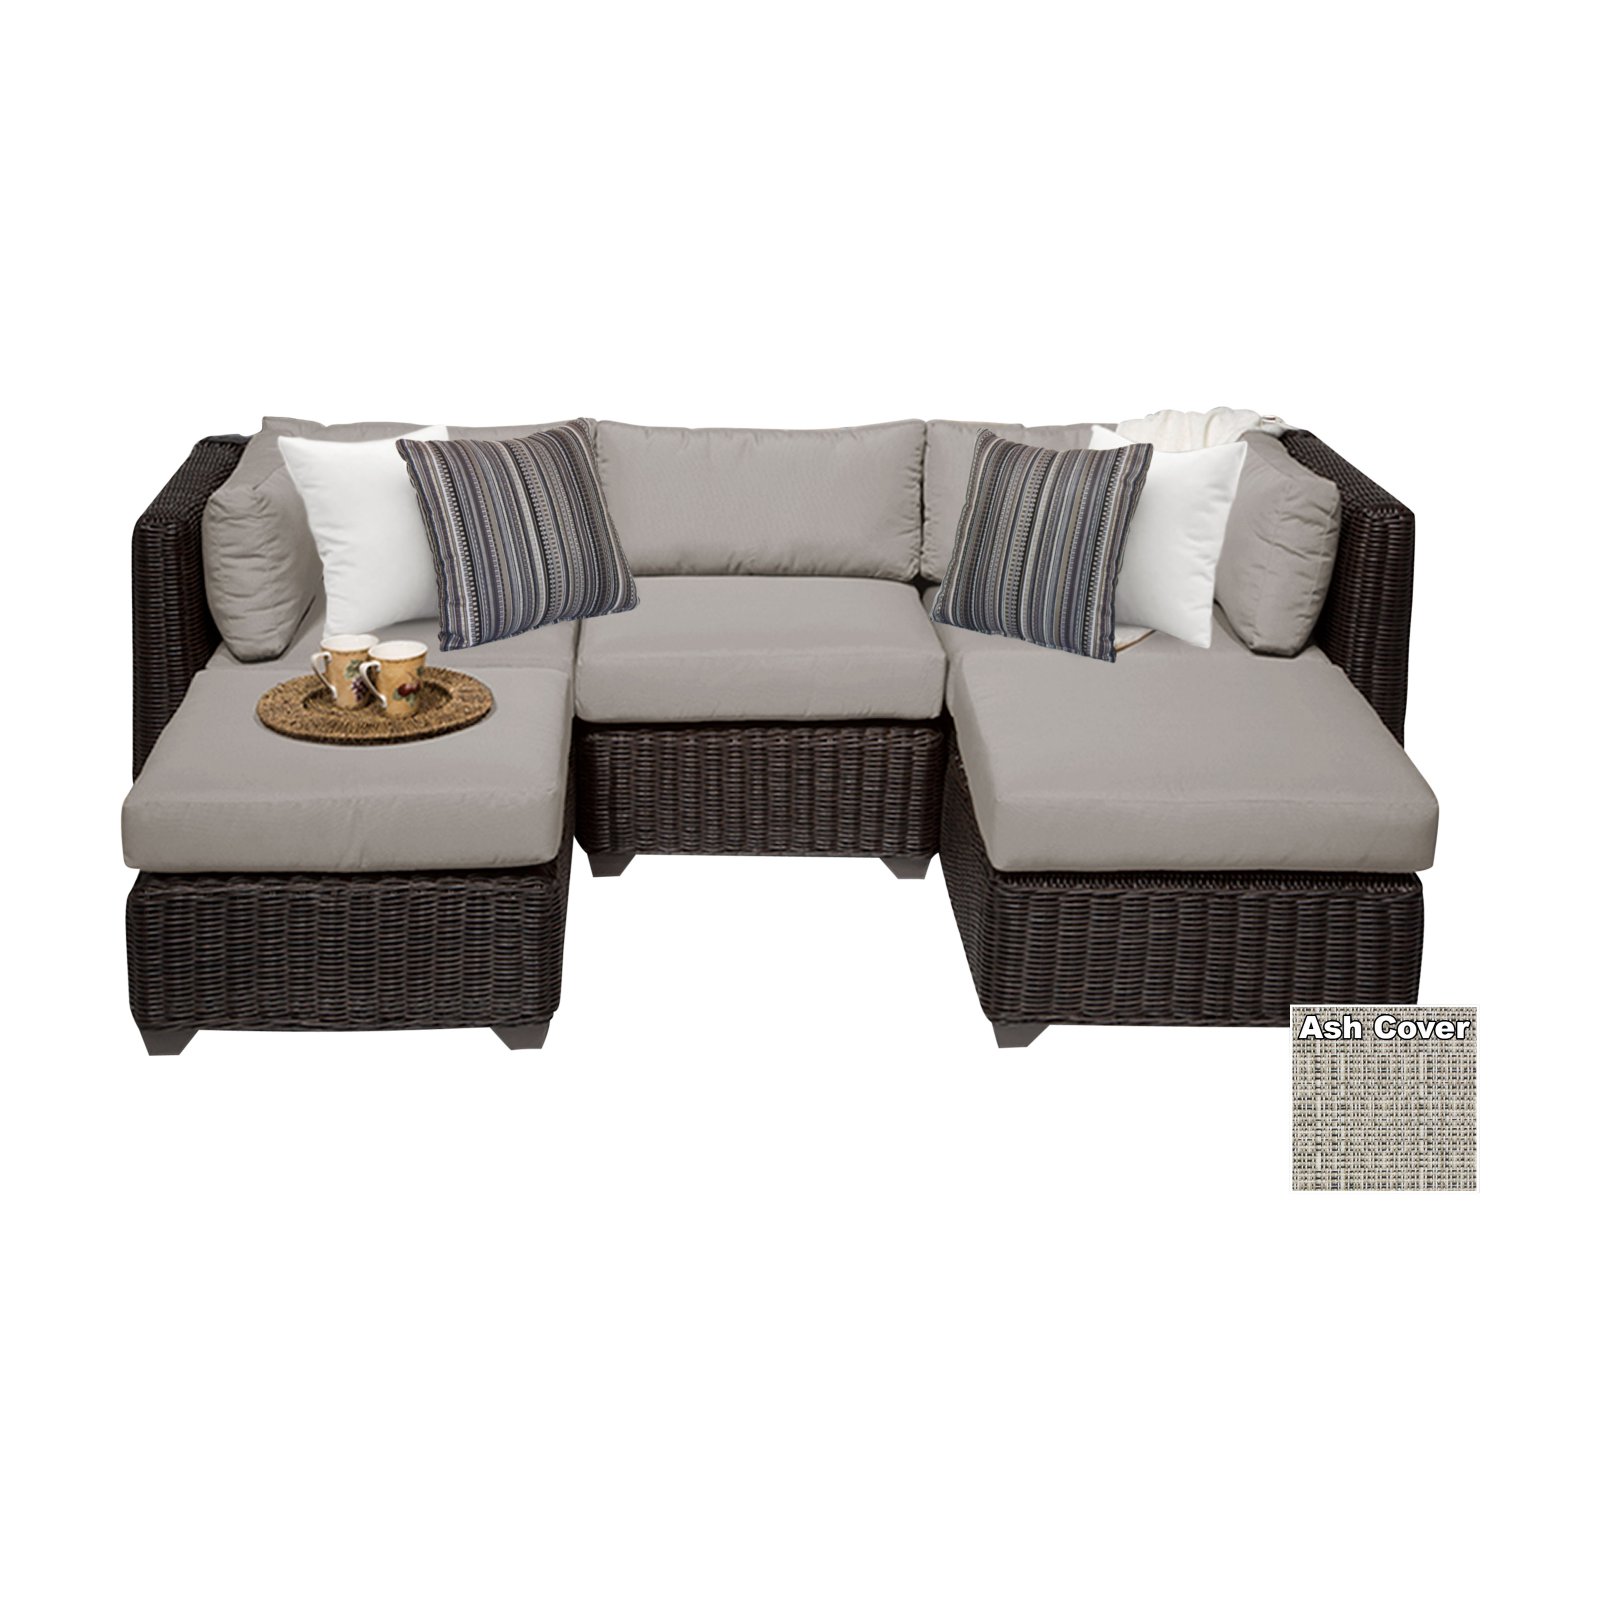 TK Classics Venice Wicker 5 Piece Patio Conversation Set with 2 Sets of Cushion Covers - image 1 of 3